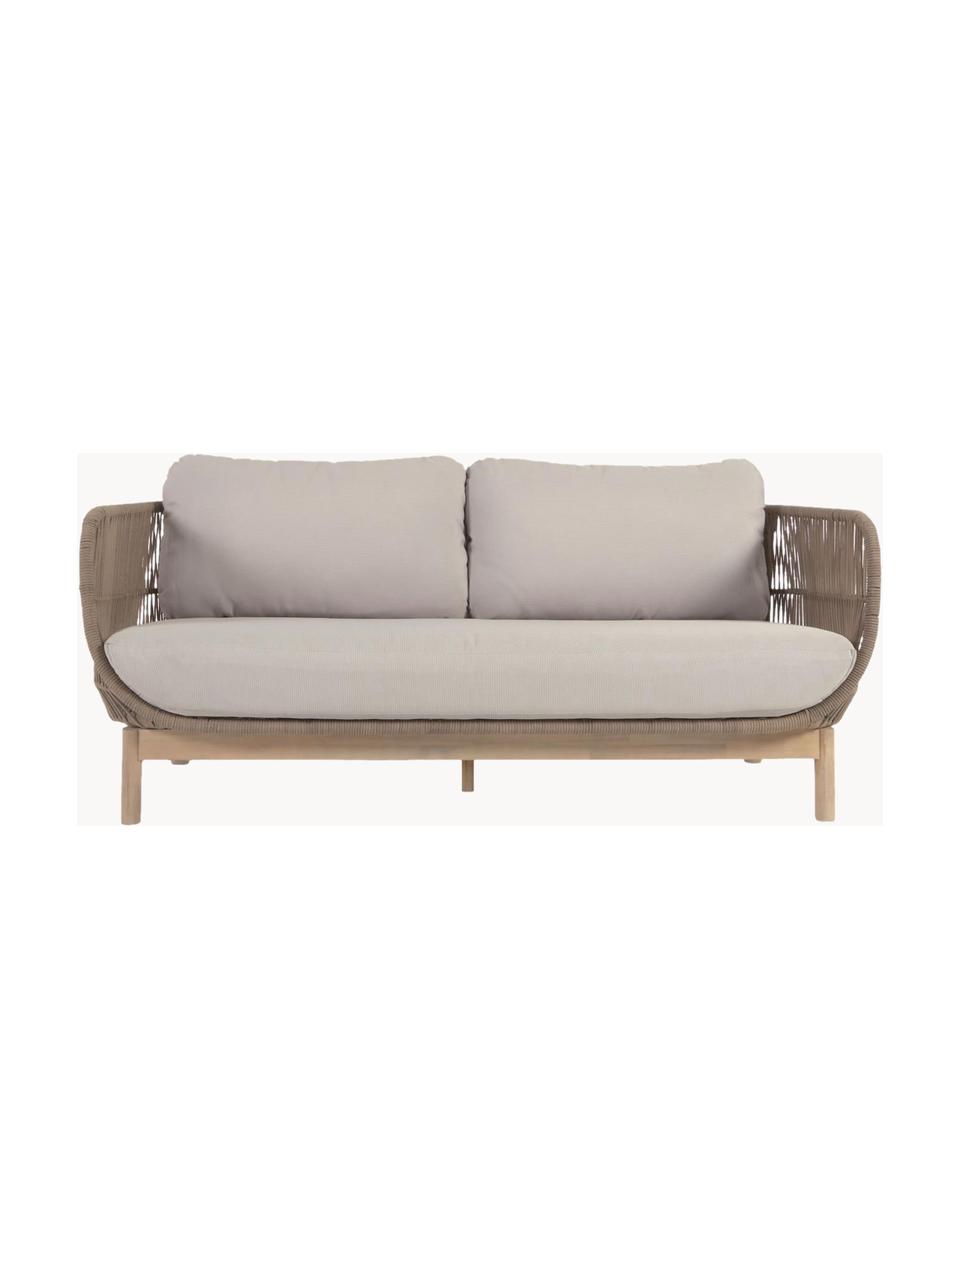 Tuin loungebank (2-zits) Catalina van acaciahout, Bekleding: 100% polyester, Frame: acaciahout Dit product is, Corduroy beige, acaciahout, B 170 x D 80 cm